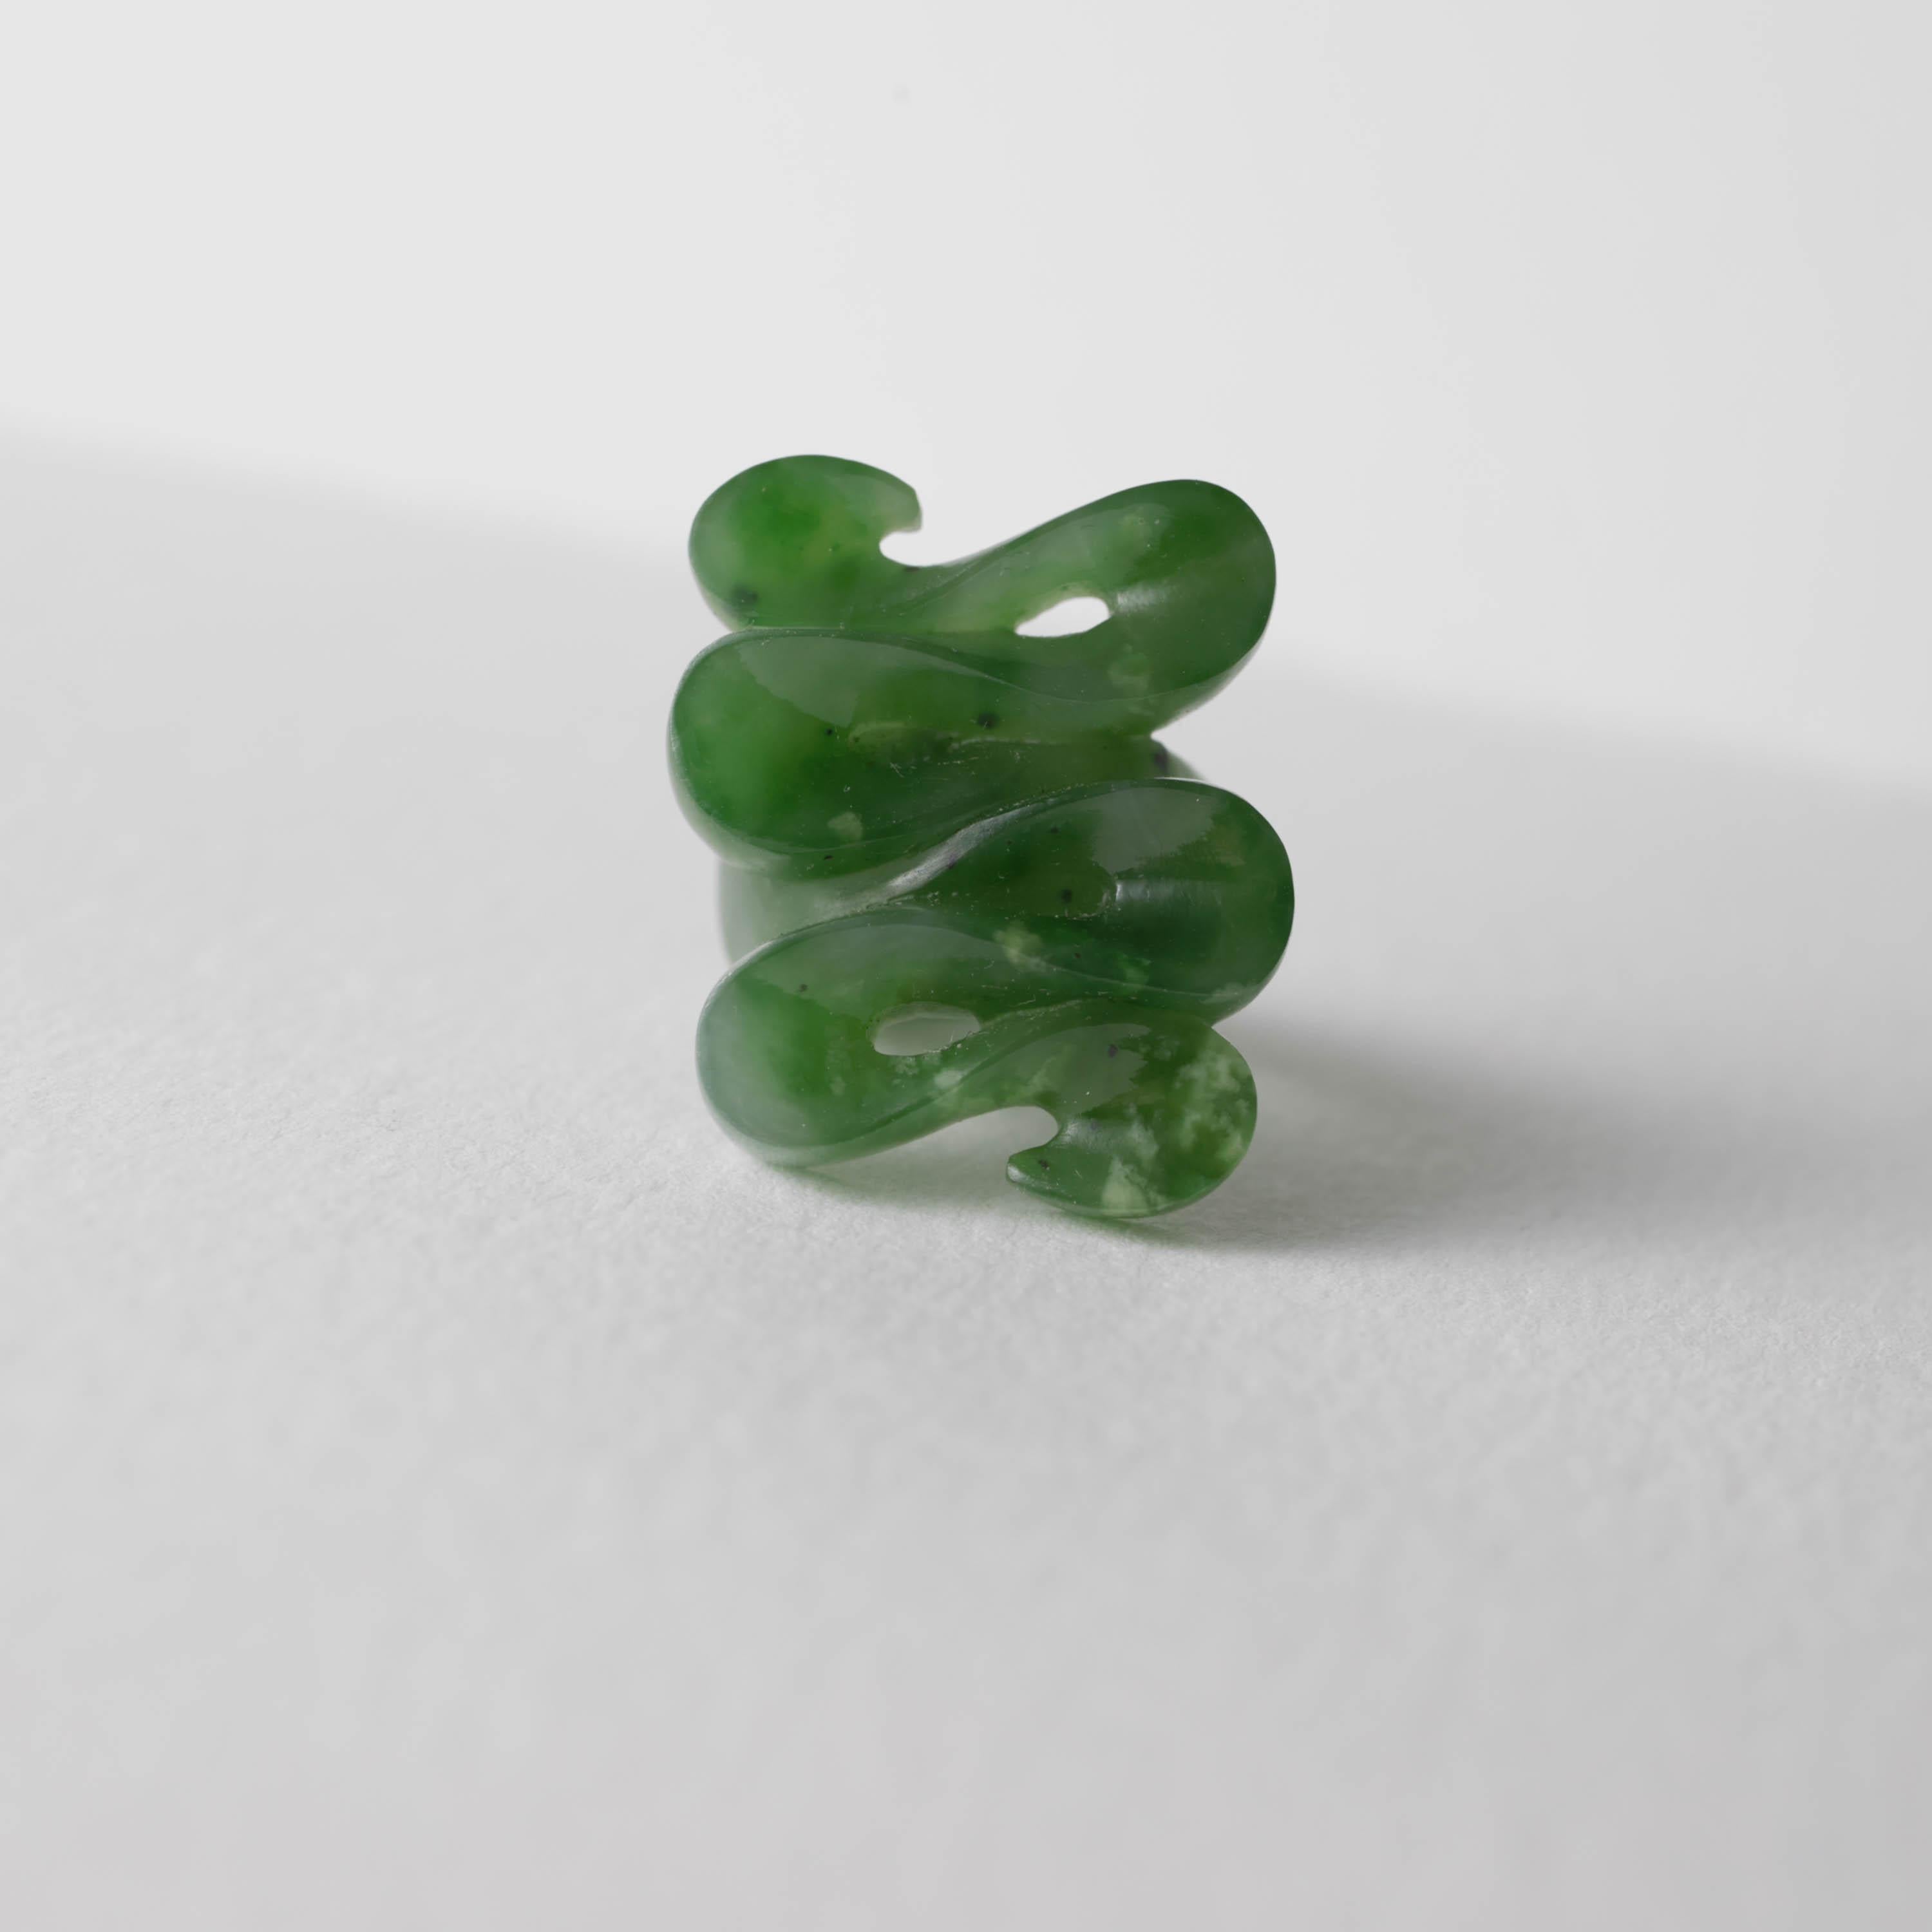 Carved from a single piece of translucent nephrite jade, this features an impeccably rendered waveform with a bright high polish. On the reverse, you will find a shank carved with a very soft matt finish. The juxtaposition of the glossy polish on